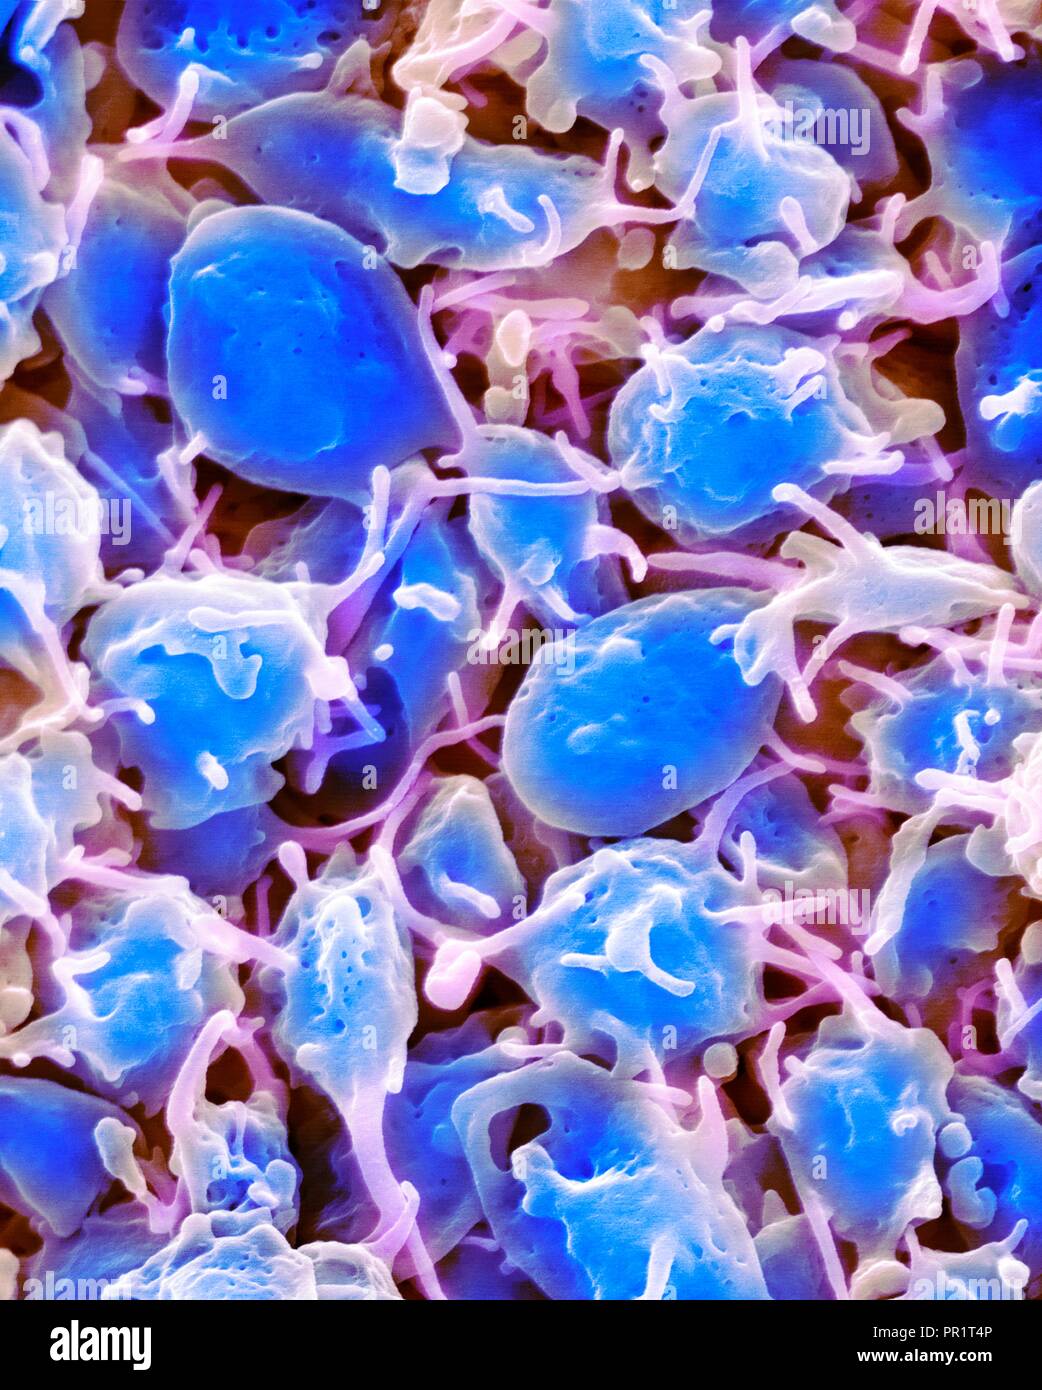 Activated platelets, coloured scanning electron micrograph (SEM). Platelets are blood cell fragments that play an essential role in blood clotting and wound repair, and can also activate certain immune responses. They are formed in the red bone marrow, lungs, and spleen by fragmentation of very large cells known as megakaryocytes. Platelets in the blood are small oval disks and are termed non-activated platelets or thrombocytes. They are the body's first line of defence against excessive blood loss. Magnification: x2,000 at 10 cm wide. Stock Photo